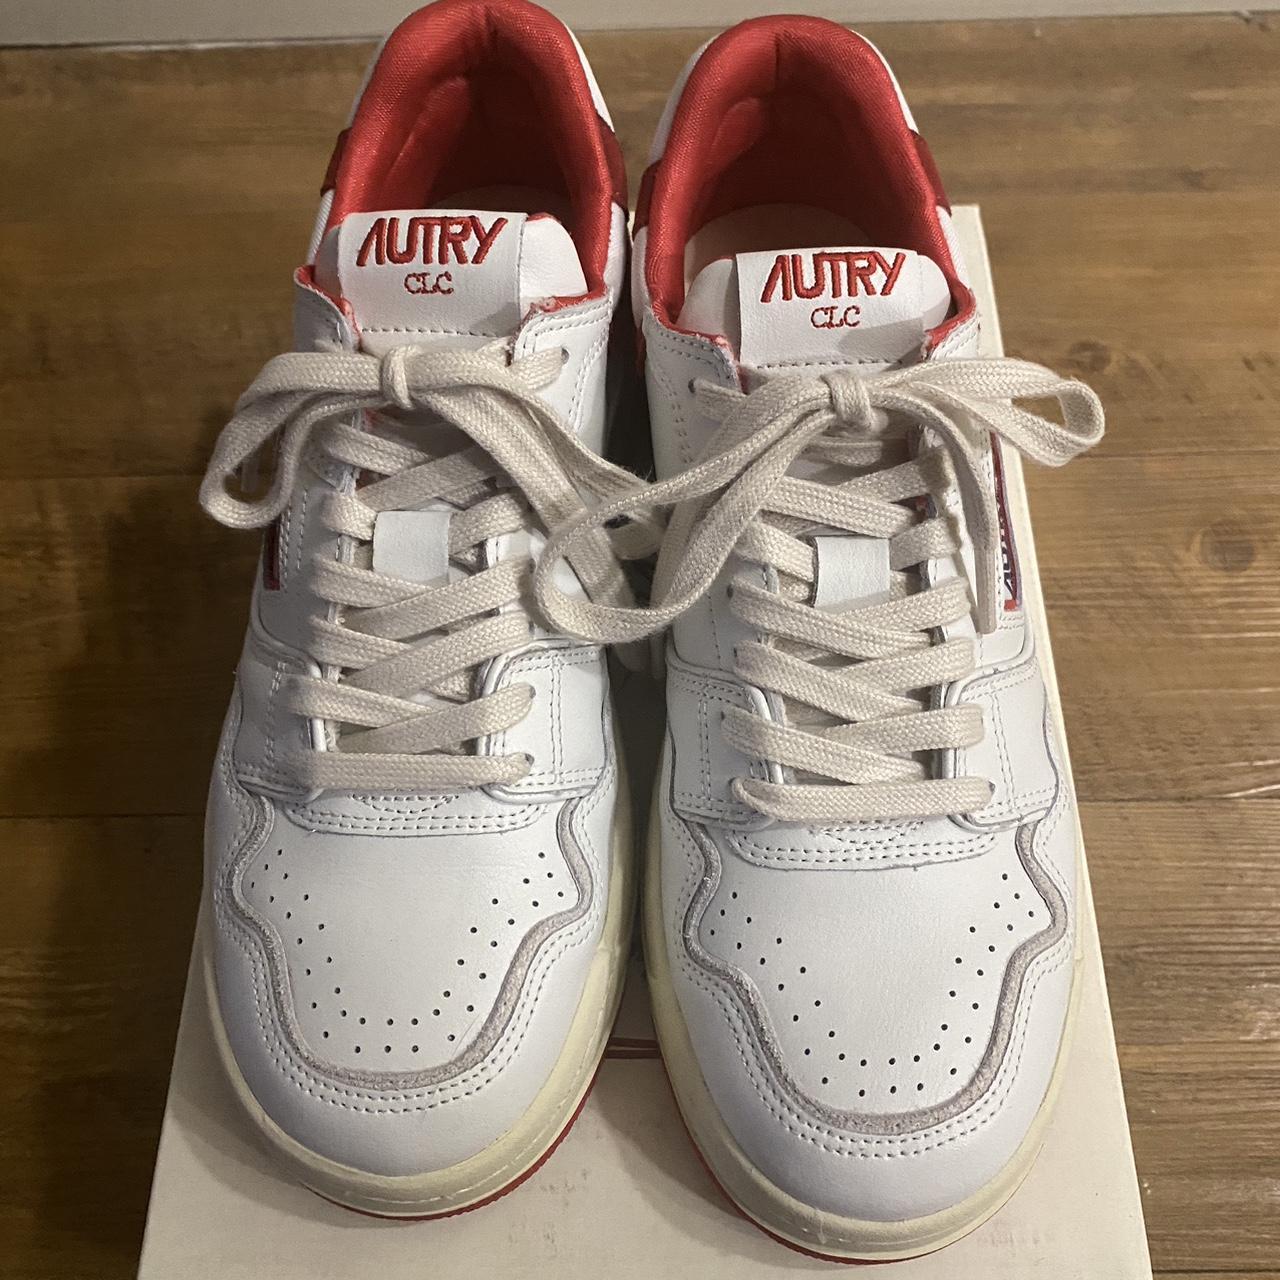 Autry Men's White and Red Trainers (3)